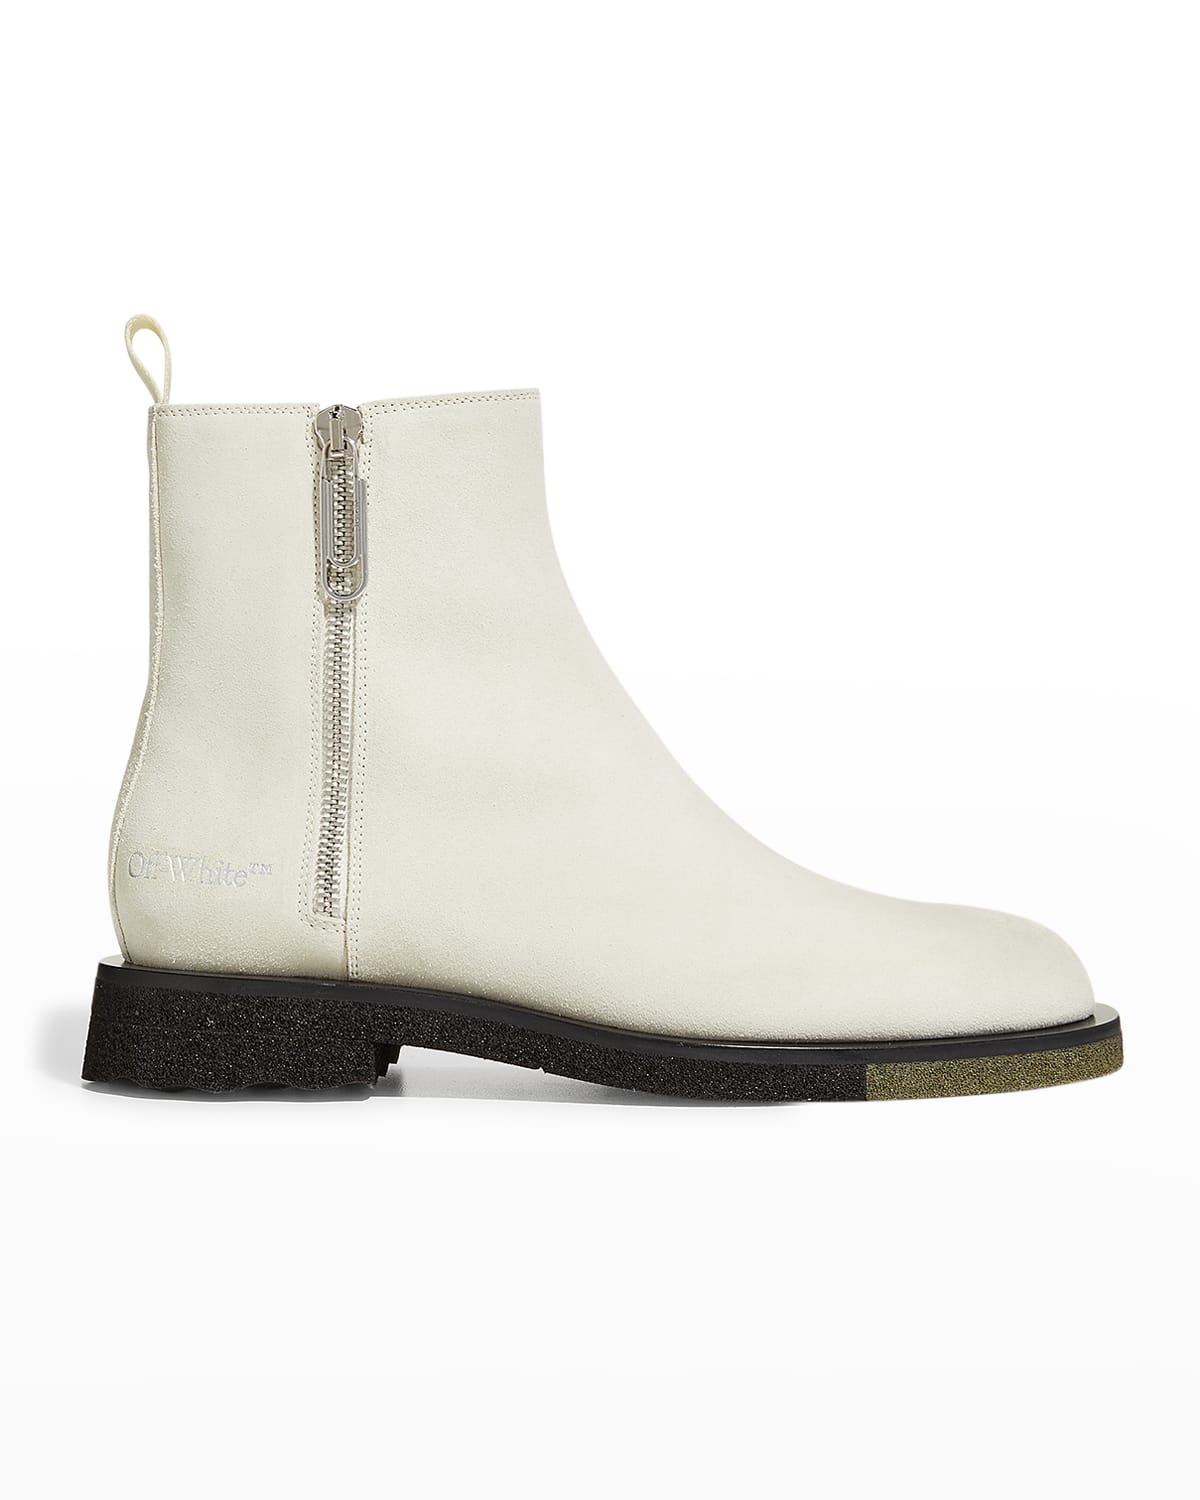 OFF-WHITE MEN'S SPONGE SOLE LEATHER ANKLE BOOTS